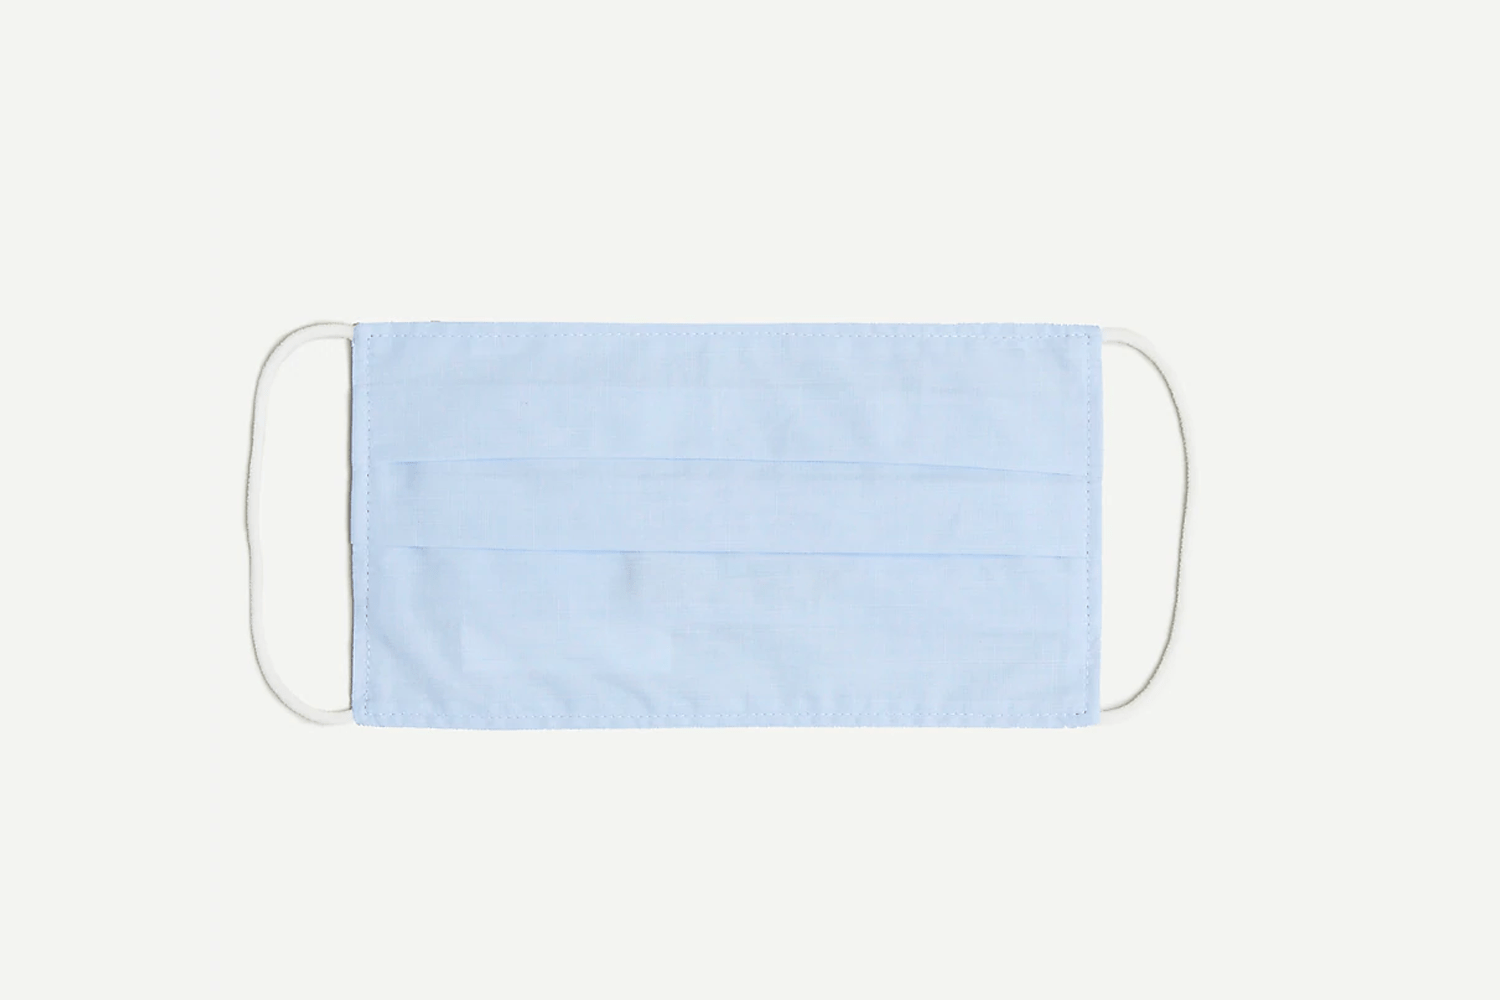 J.Crew Nonmedical Face Masks in Mixed Prints, 3-Pack